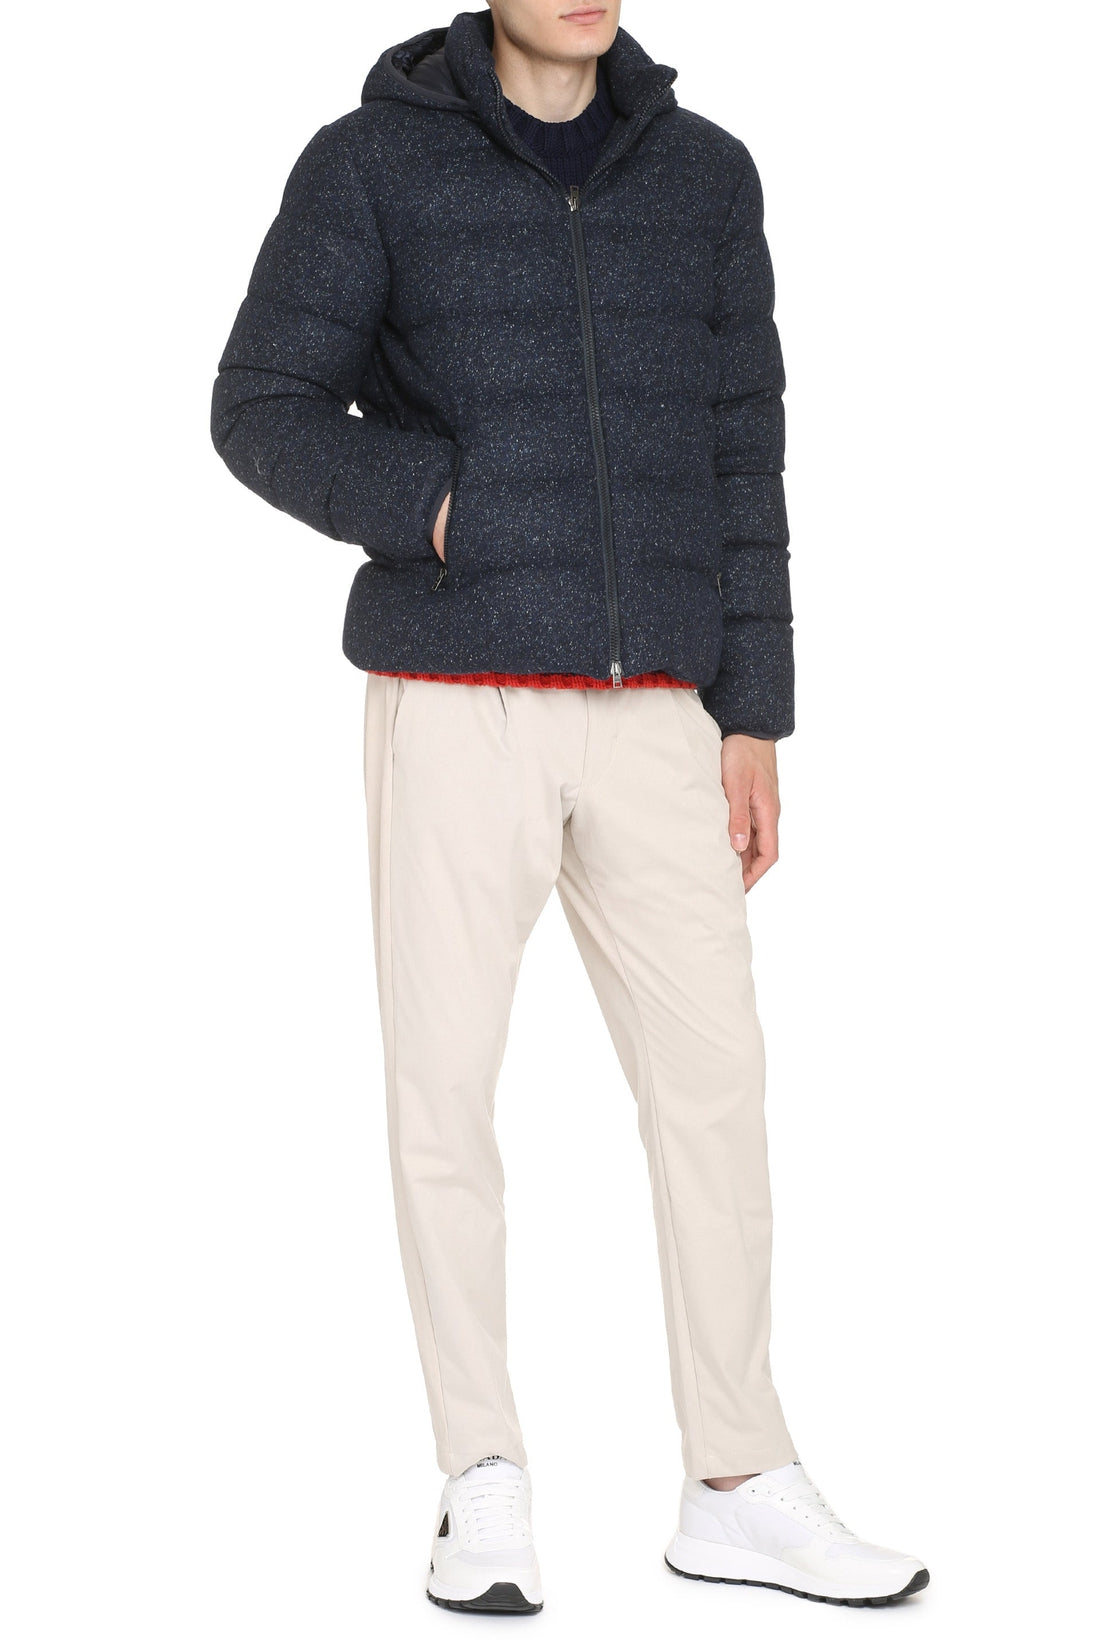 Herno-OUTLET-SALE-Full zip down jacket-ARCHIVIST